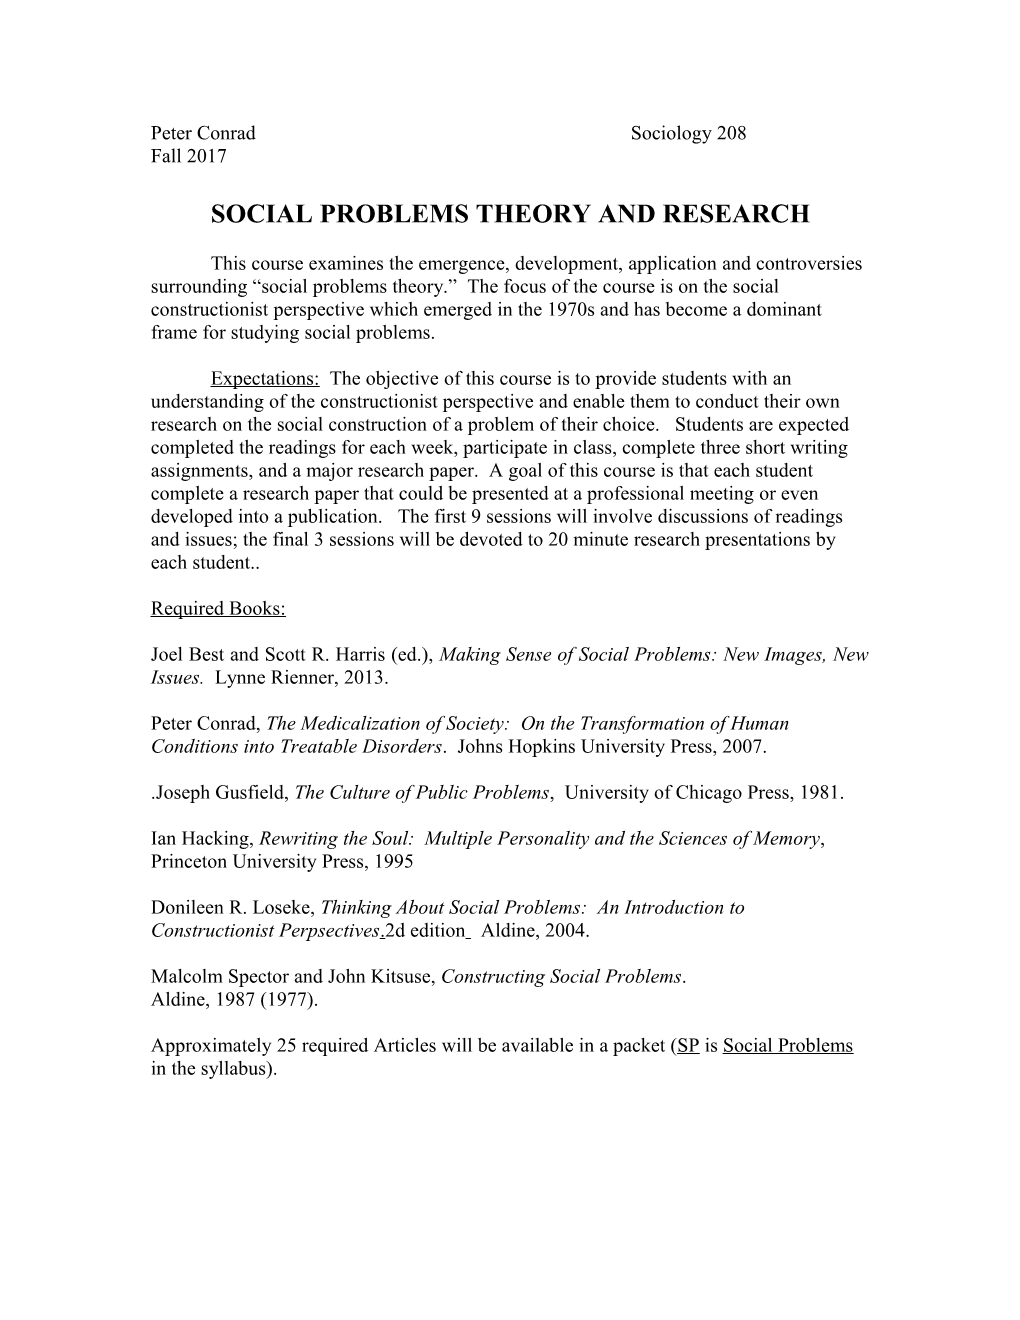 Social Problems Theory and Research